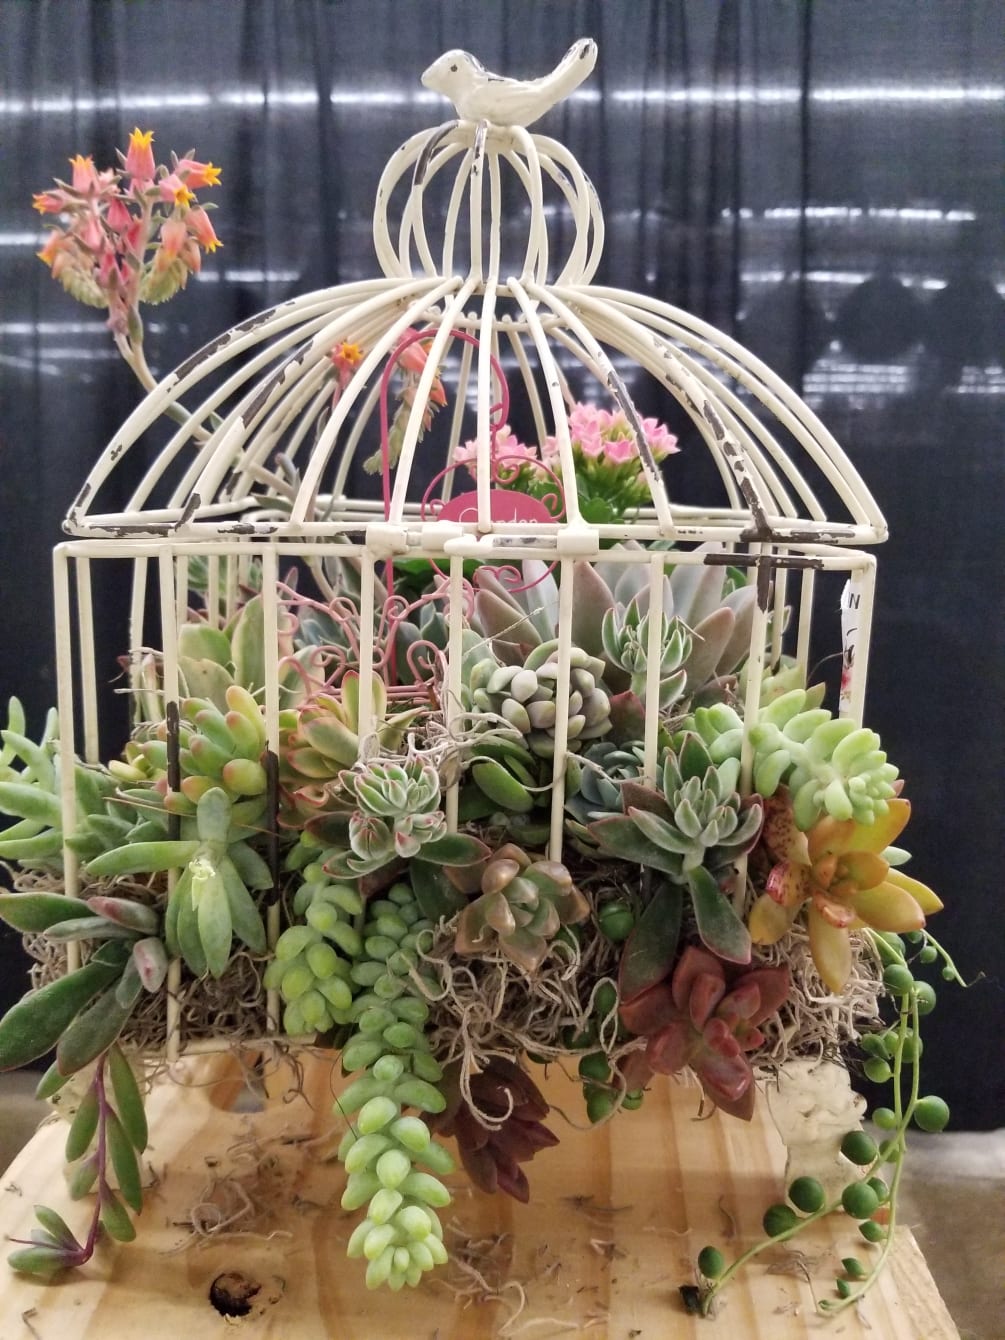 A variety of succulents planted in a birdcage. This is a very